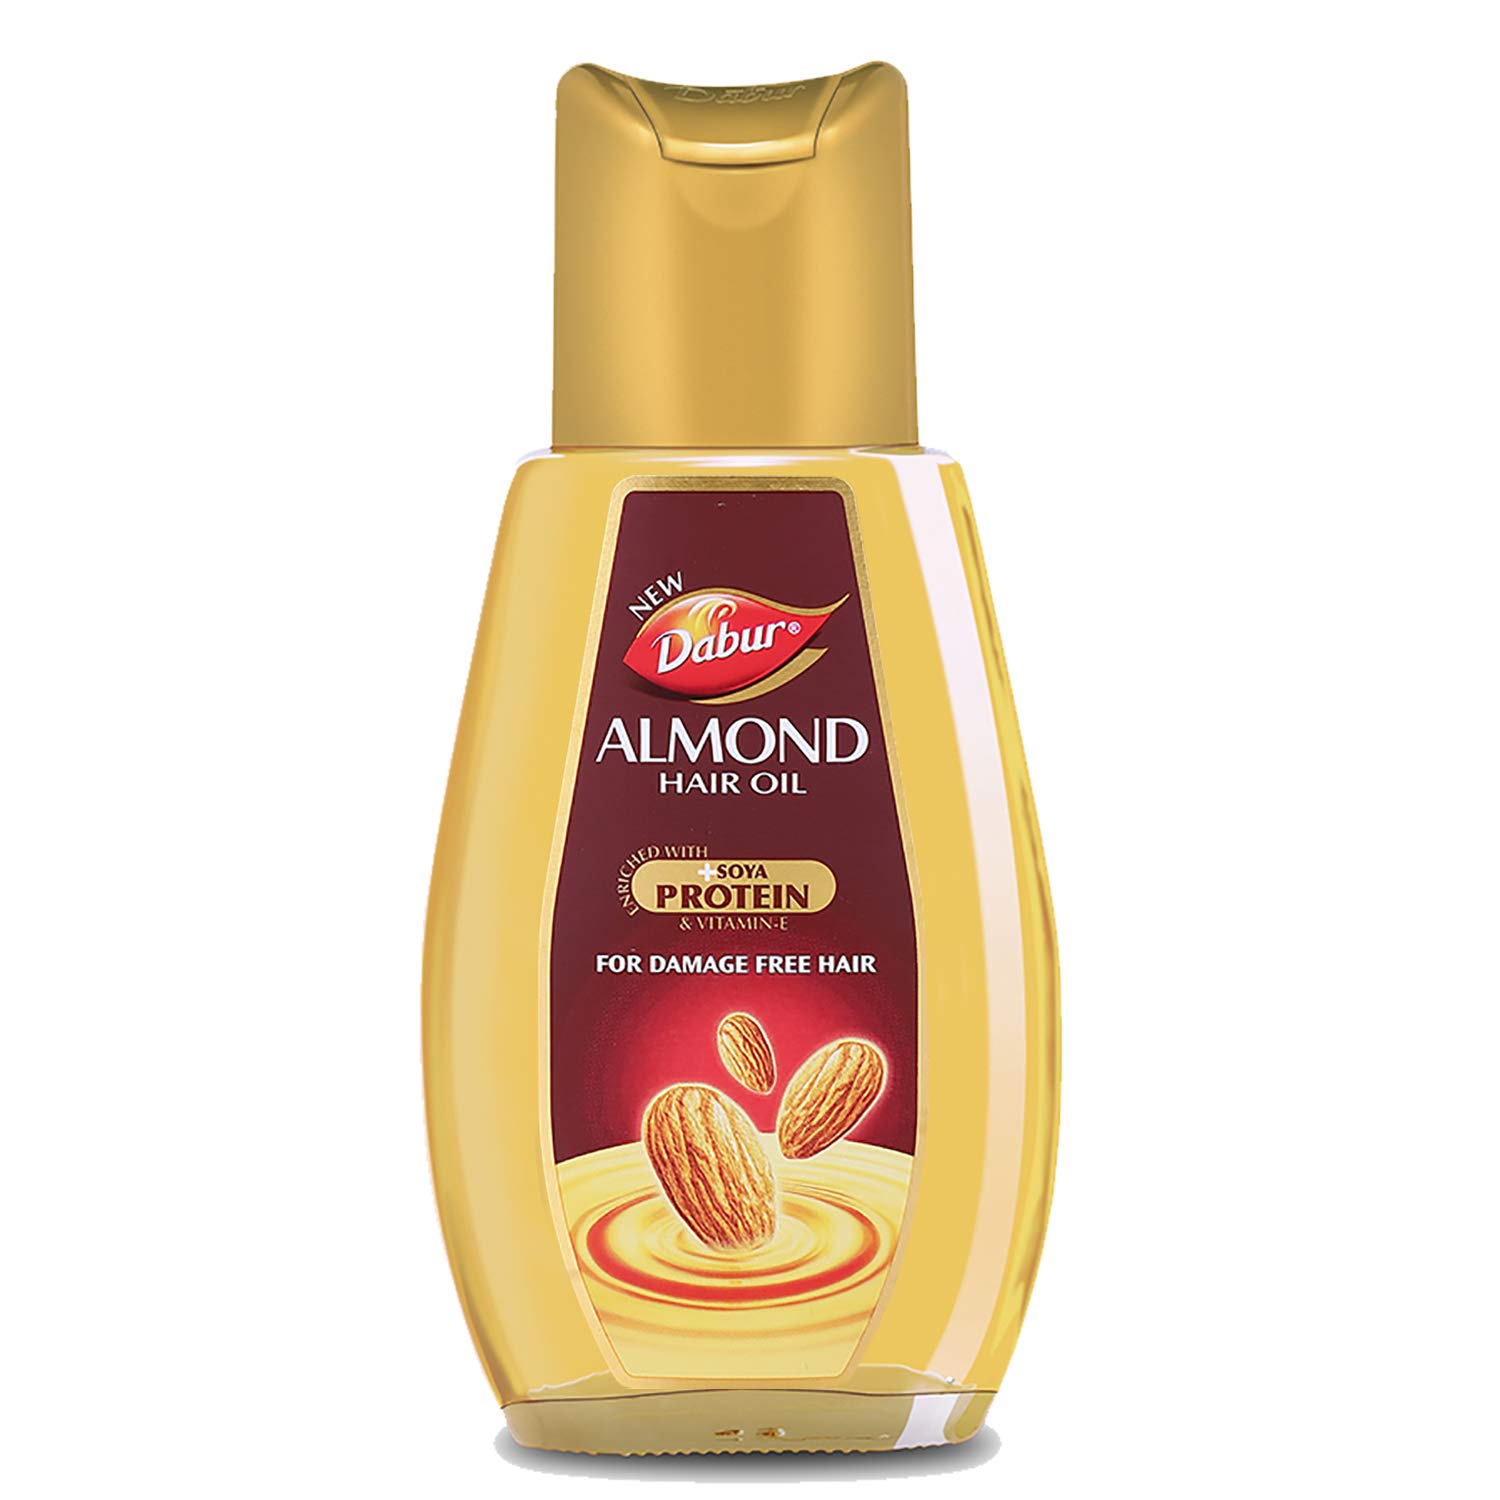 The Many Benefits of Almond Oil For Hair  Feminain